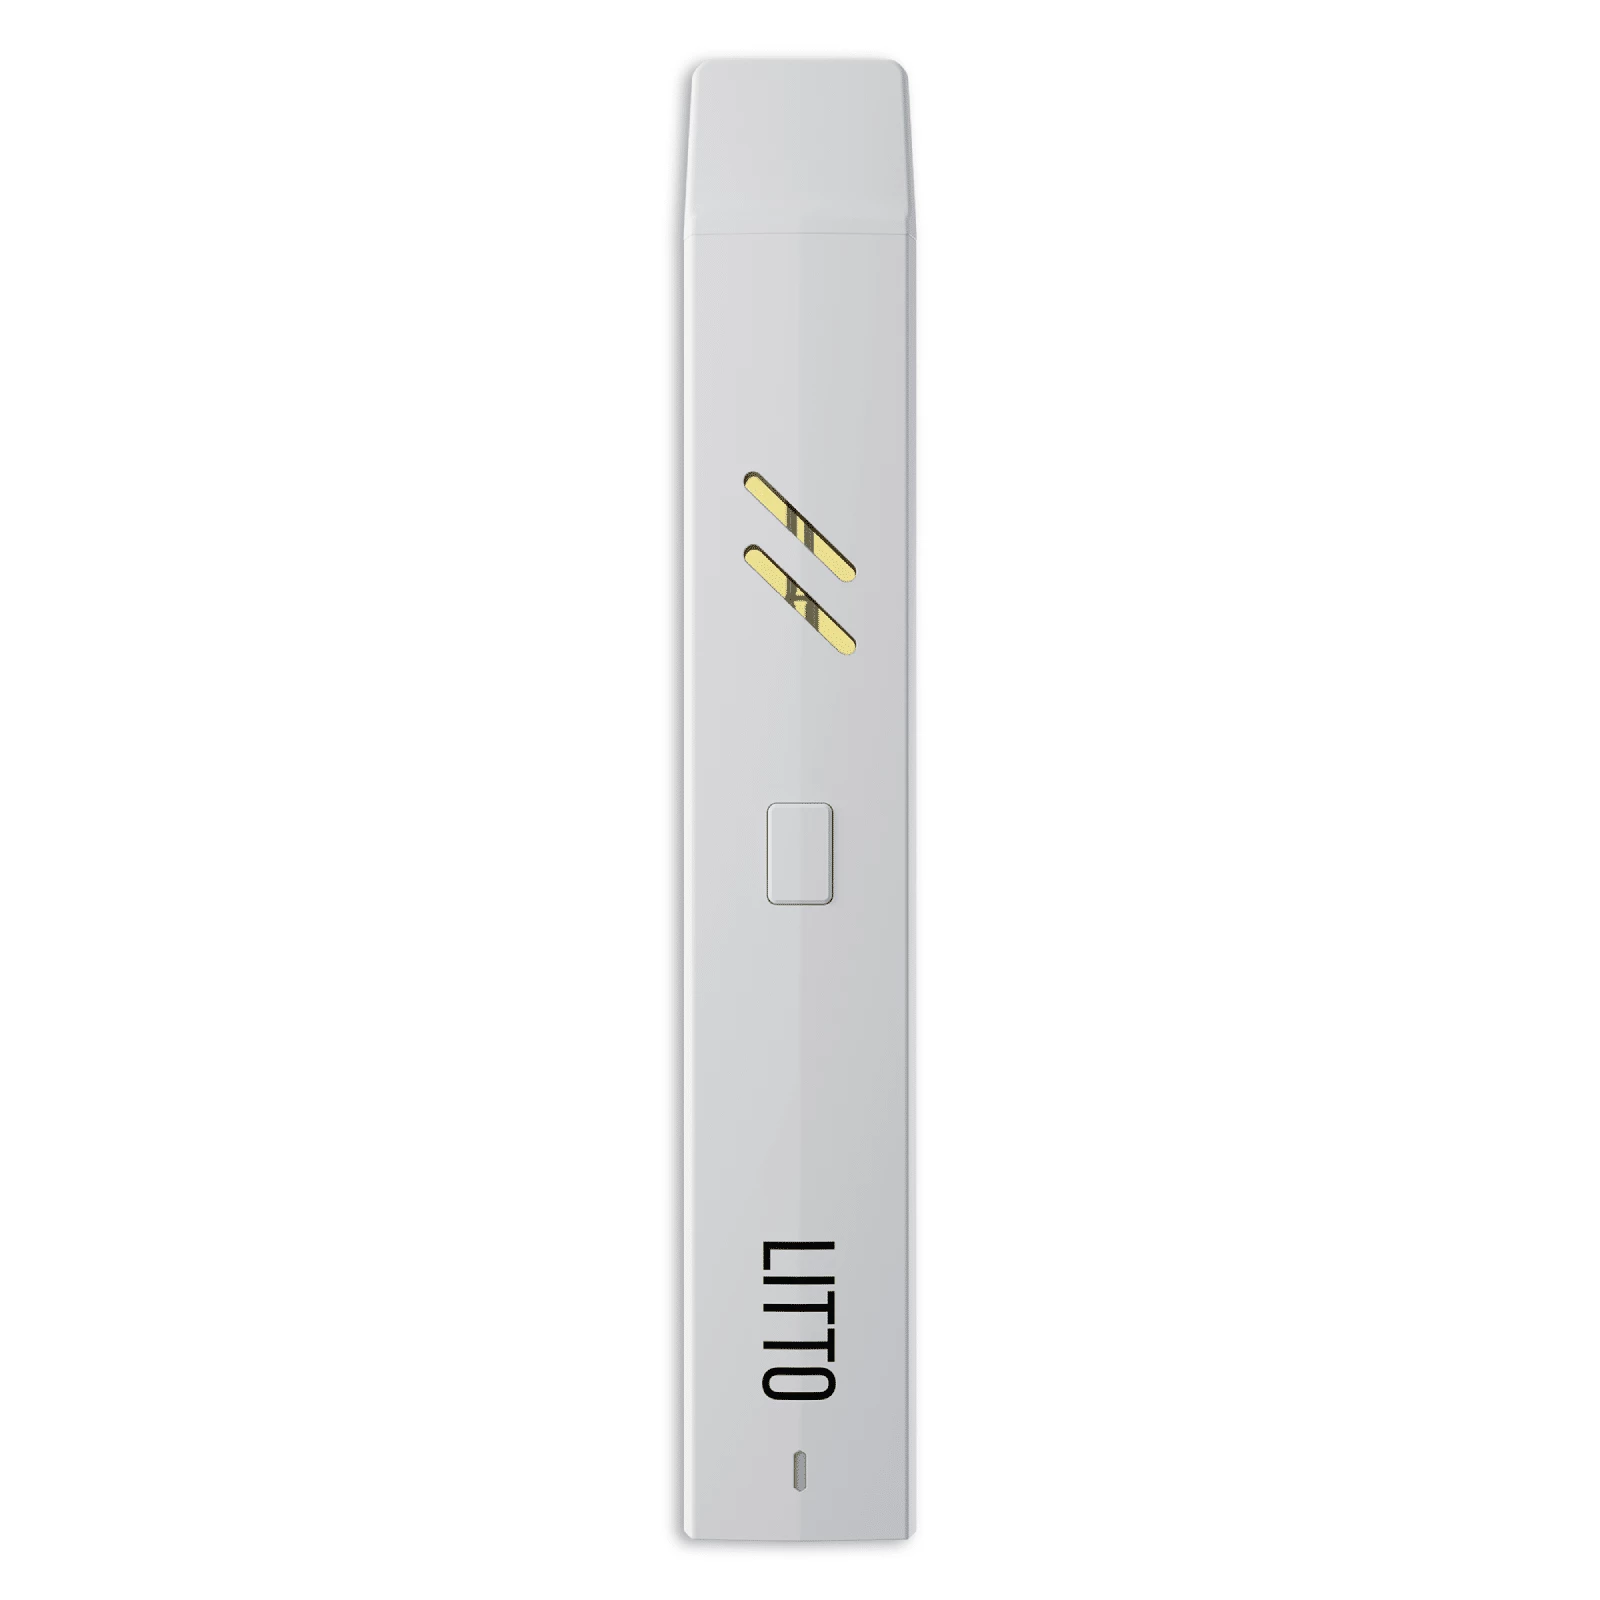 A litto hhc aio tri blend disposable vape pen (2g) electronic cigarette with a yellow stripe on it.